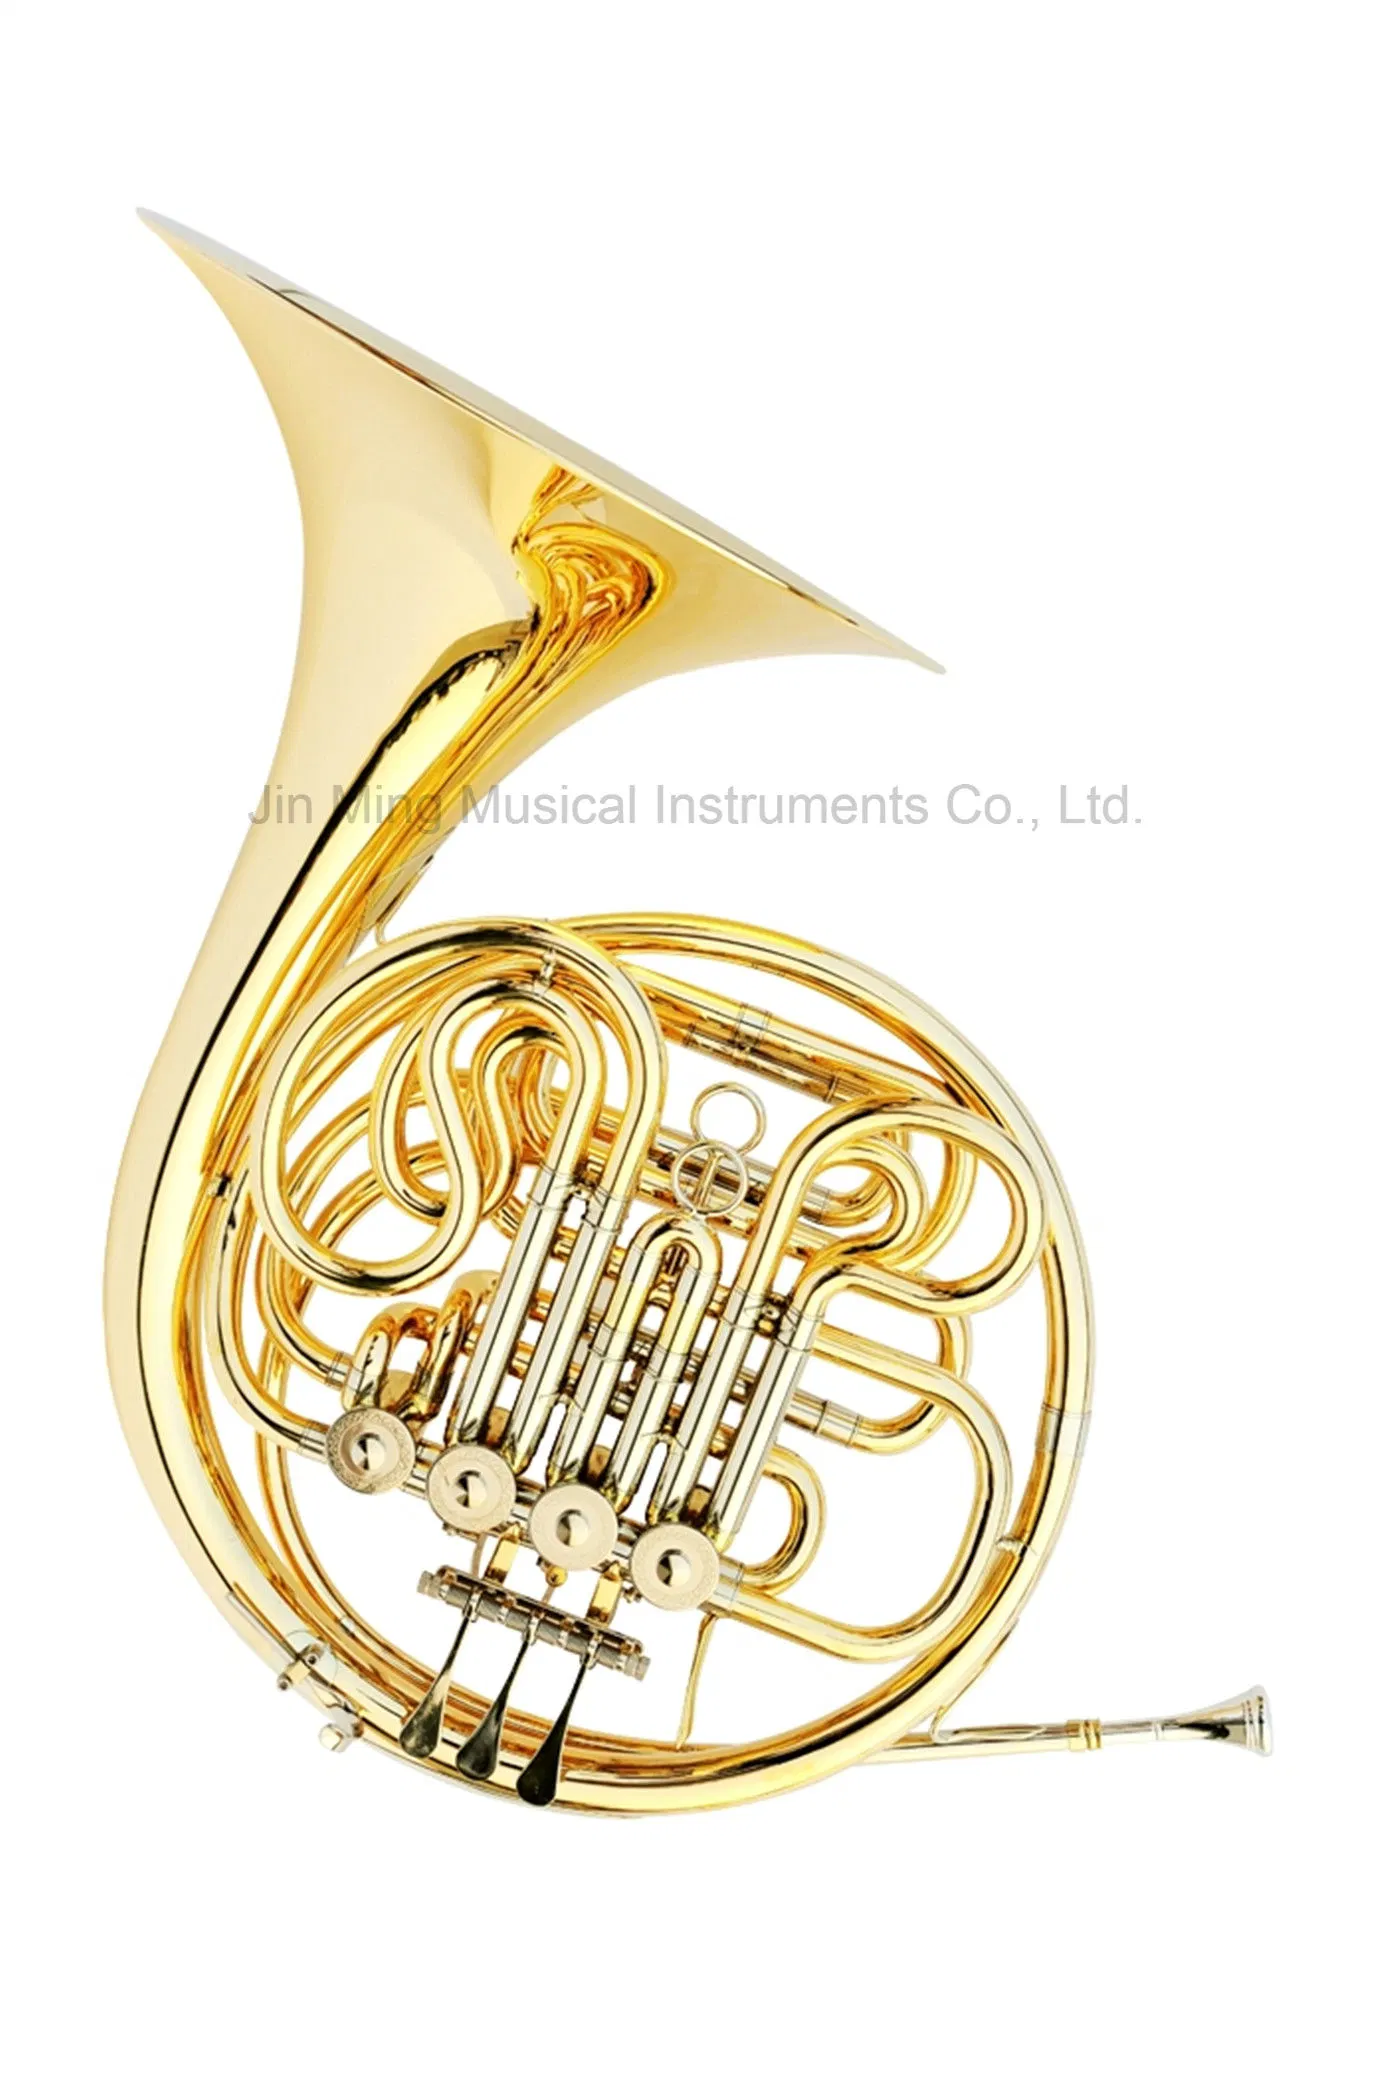 F/Bb French Horn/ 4 Key Double/ Good Brass Instrument